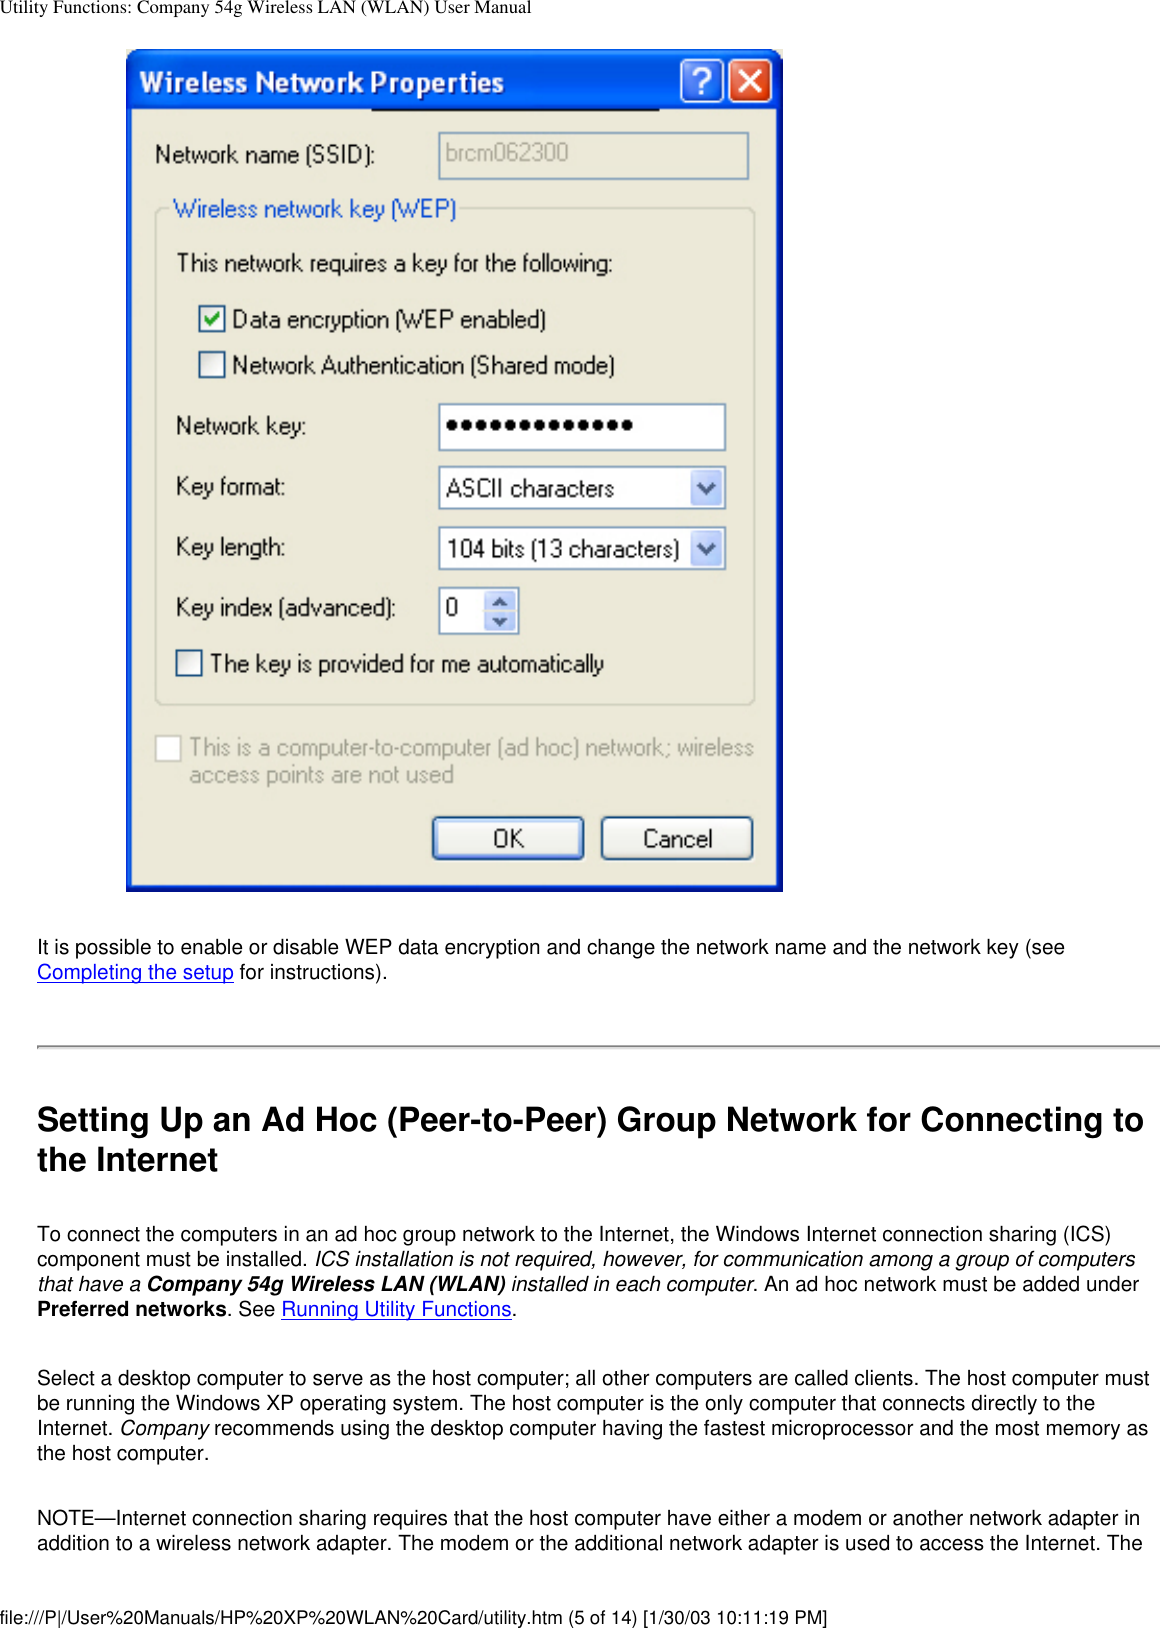 Utility Functions: Company 54g Wireless LAN (WLAN) User ManualIt is possible to enable or disable WEP data encryption and change the network name and the network key (see Completing the setup for instructions). Setting Up an Ad Hoc (Peer-to-Peer) Group Network for Connecting to the InternetTo connect the computers in an ad hoc group network to the Internet, the Windows Internet connection sharing (ICS) component must be installed. ICS installation is not required, however, for communication among a group of computers that have a Company 54g Wireless LAN (WLAN) installed in each computer. An ad hoc network must be added under Preferred networks. See Running Utility Functions.Select a desktop computer to serve as the host computer; all other computers are called clients. The host computer must be running the Windows XP operating system. The host computer is the only computer that connects directly to the Internet. Company recommends using the desktop computer having the fastest microprocessor and the most memory as the host computer.NOTE—Internet connection sharing requires that the host computer have either a modem or another network adapter in addition to a wireless network adapter. The modem or the additional network adapter is used to access the Internet. The file:///P|/User%20Manuals/HP%20XP%20WLAN%20Card/utility.htm (5 of 14) [1/30/03 10:11:19 PM]